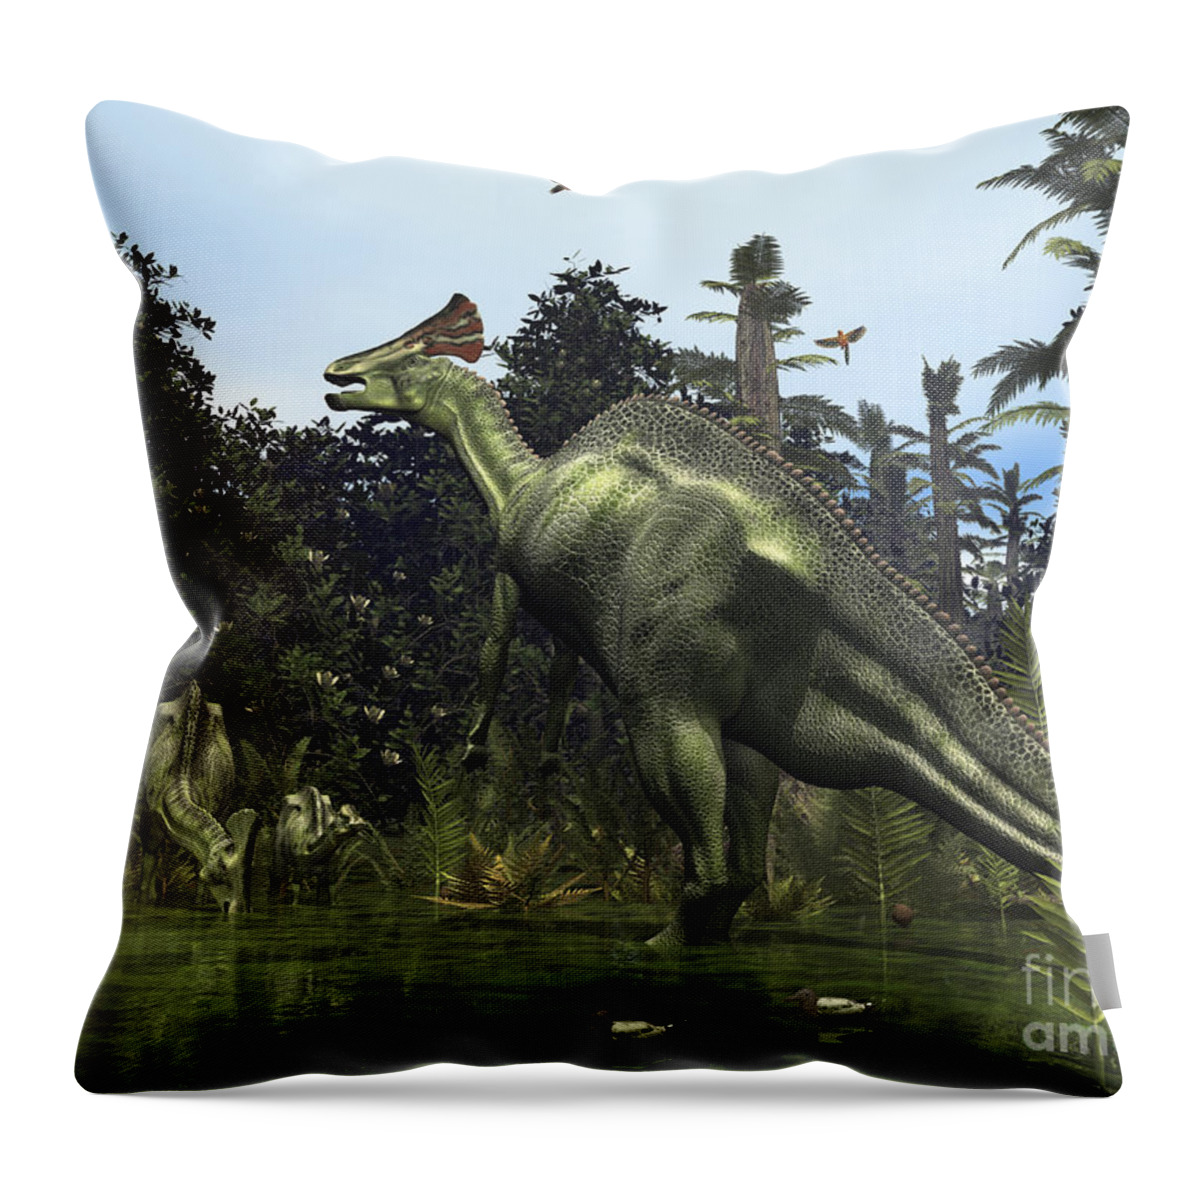 Earth Throw Pillow featuring the digital art A Lambeosaurus Rears Onto Its Hind Legs by Walter Myers